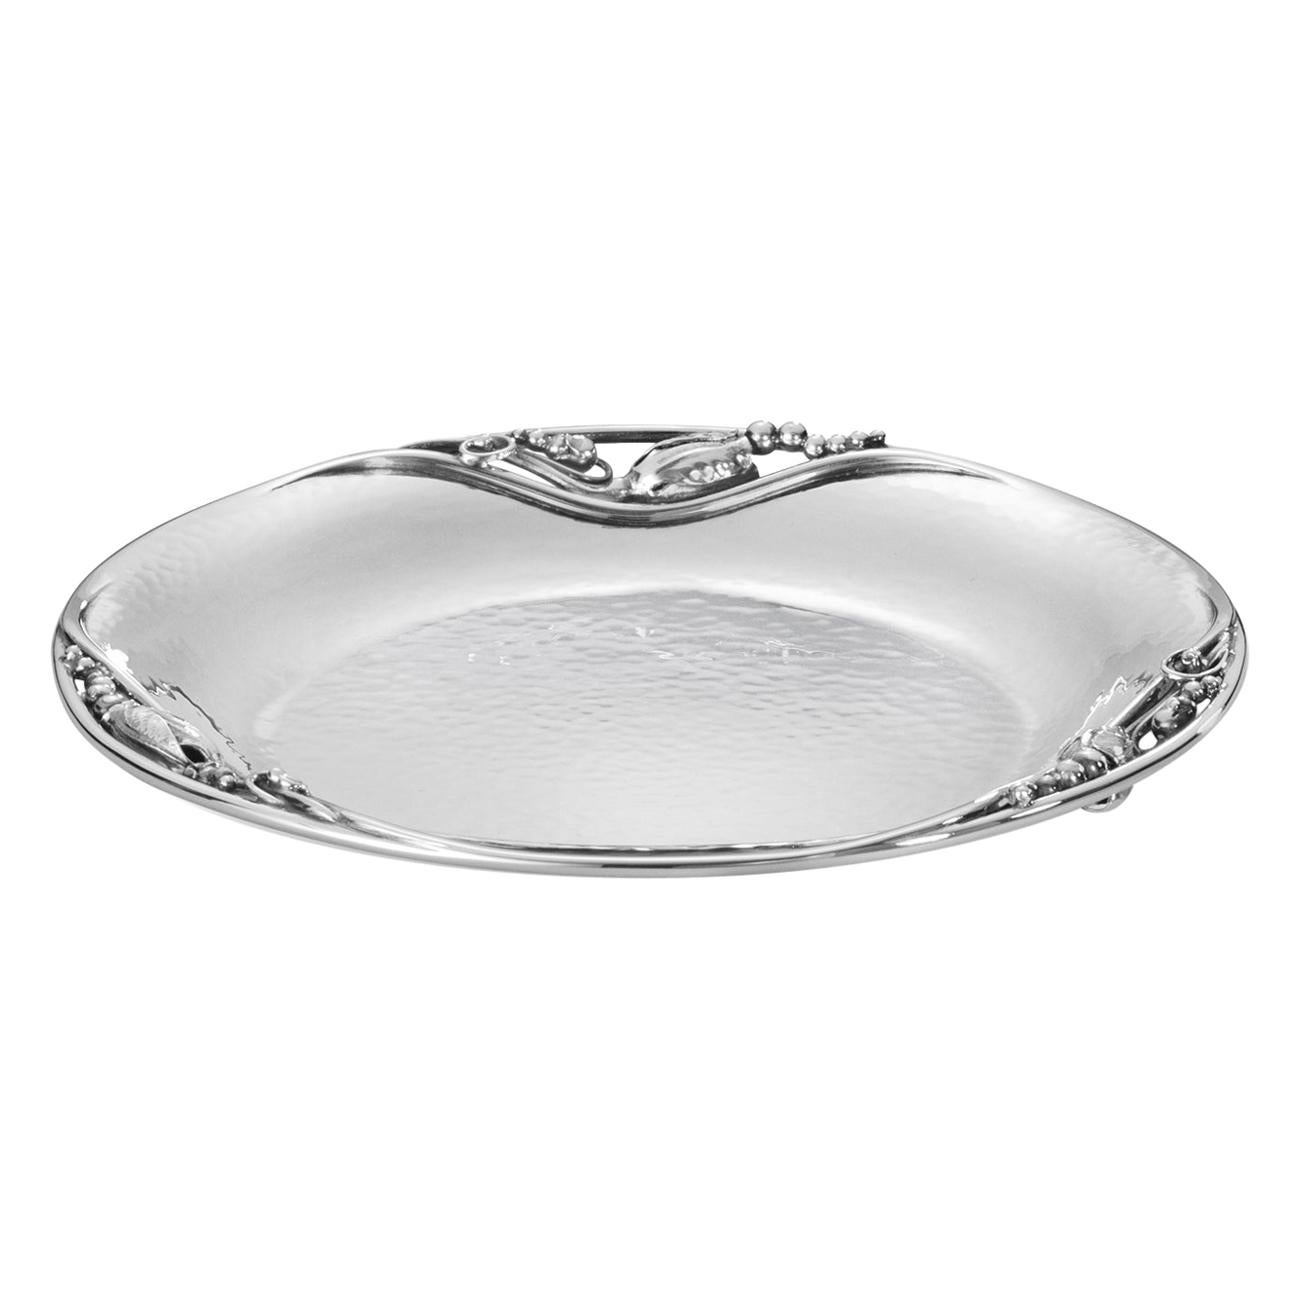 Georg Jensen 2A Handcrafted Sterling Silver Blossom Wine Bottle Tray